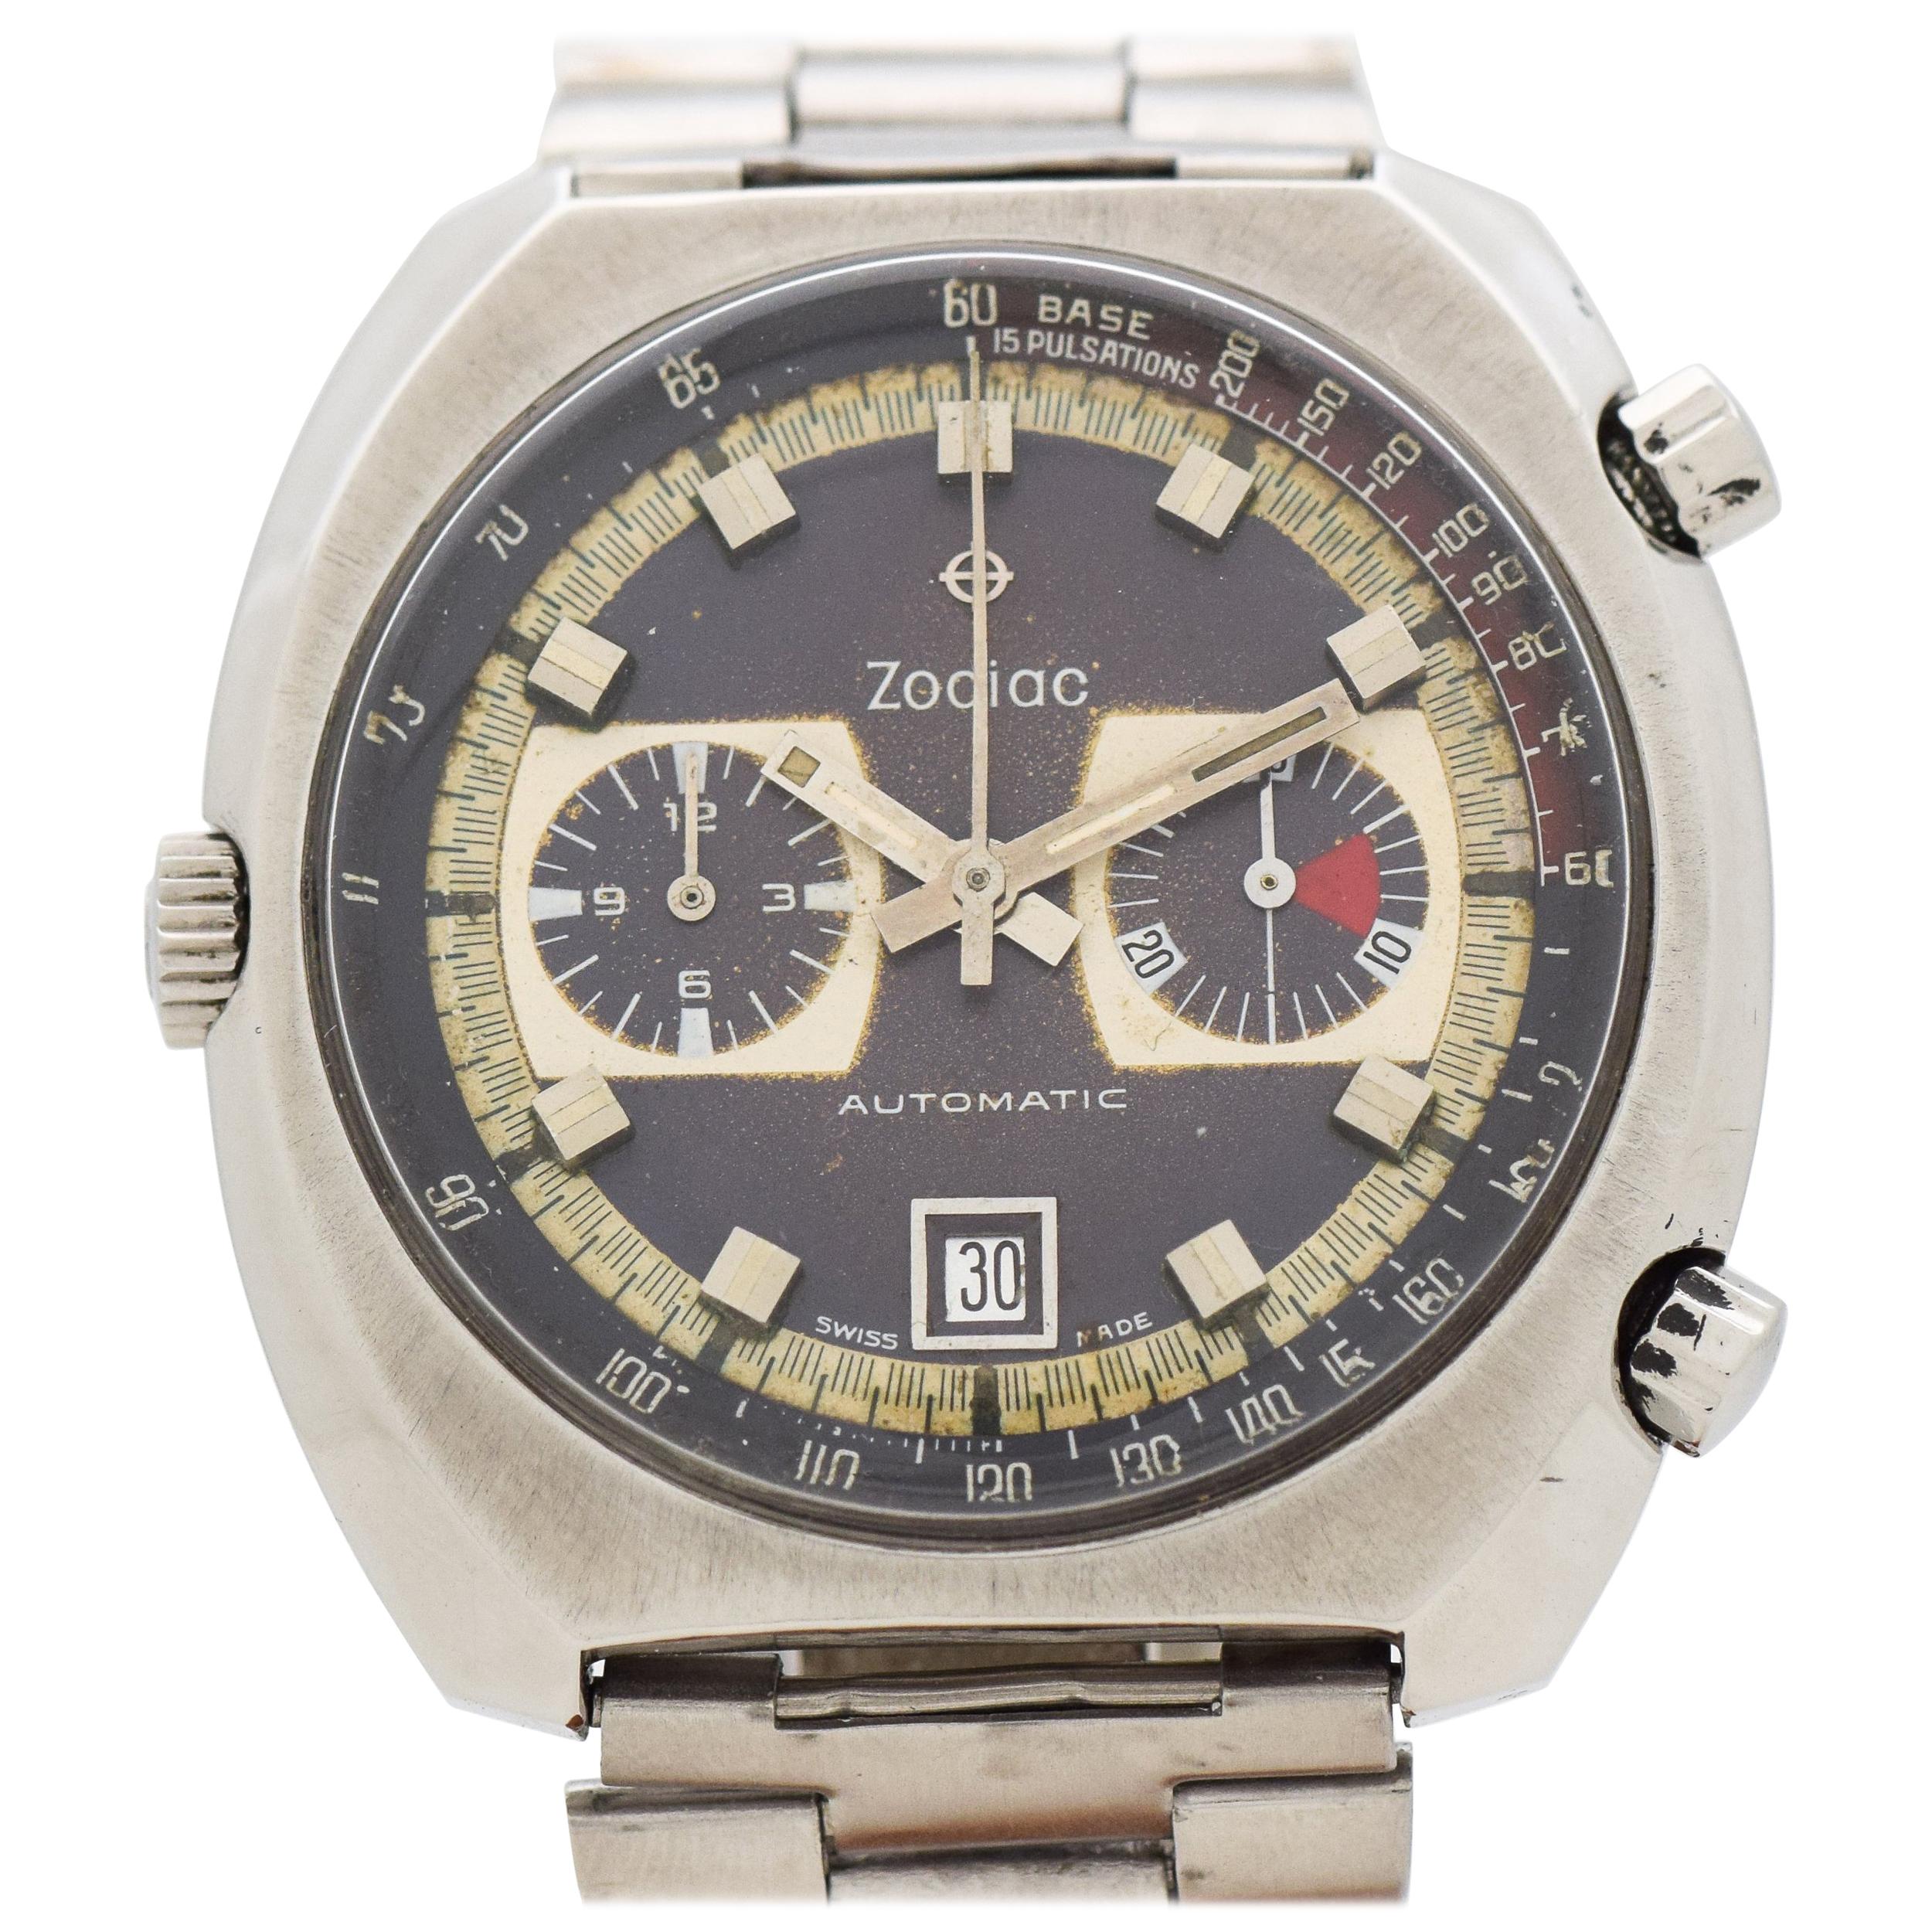 Vintage Zodiac 2-Register Chronograph in Stainless Steel, 1970s For Sale